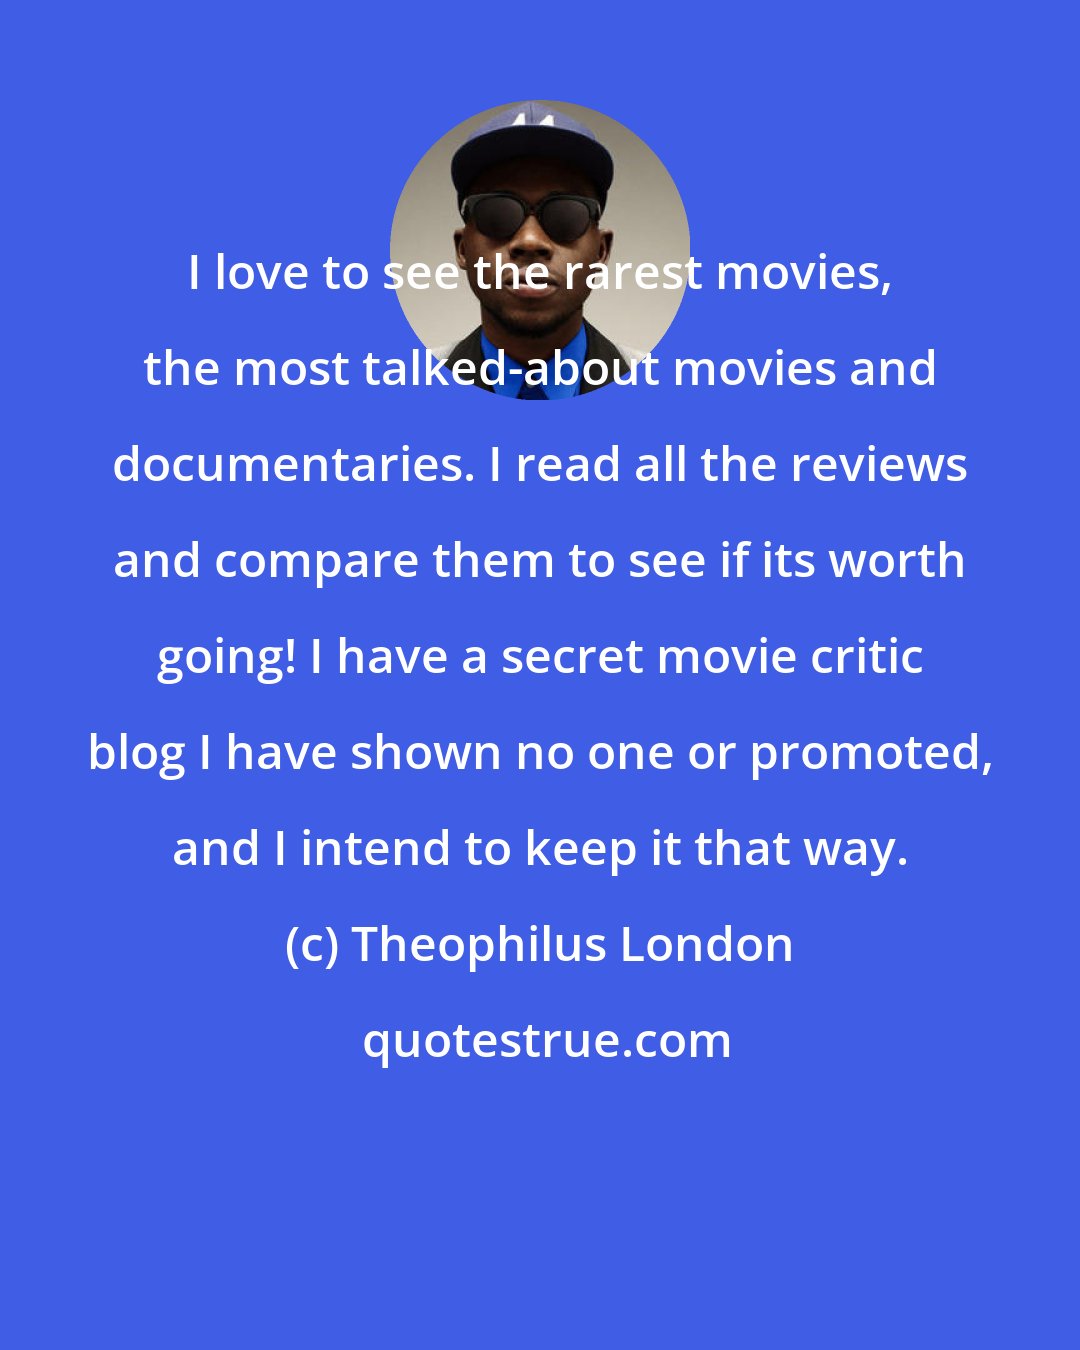 Theophilus London: I love to see the rarest movies, the most talked-about movies and documentaries. I read all the reviews and compare them to see if its worth going! I have a secret movie critic blog I have shown no one or promoted, and I intend to keep it that way.